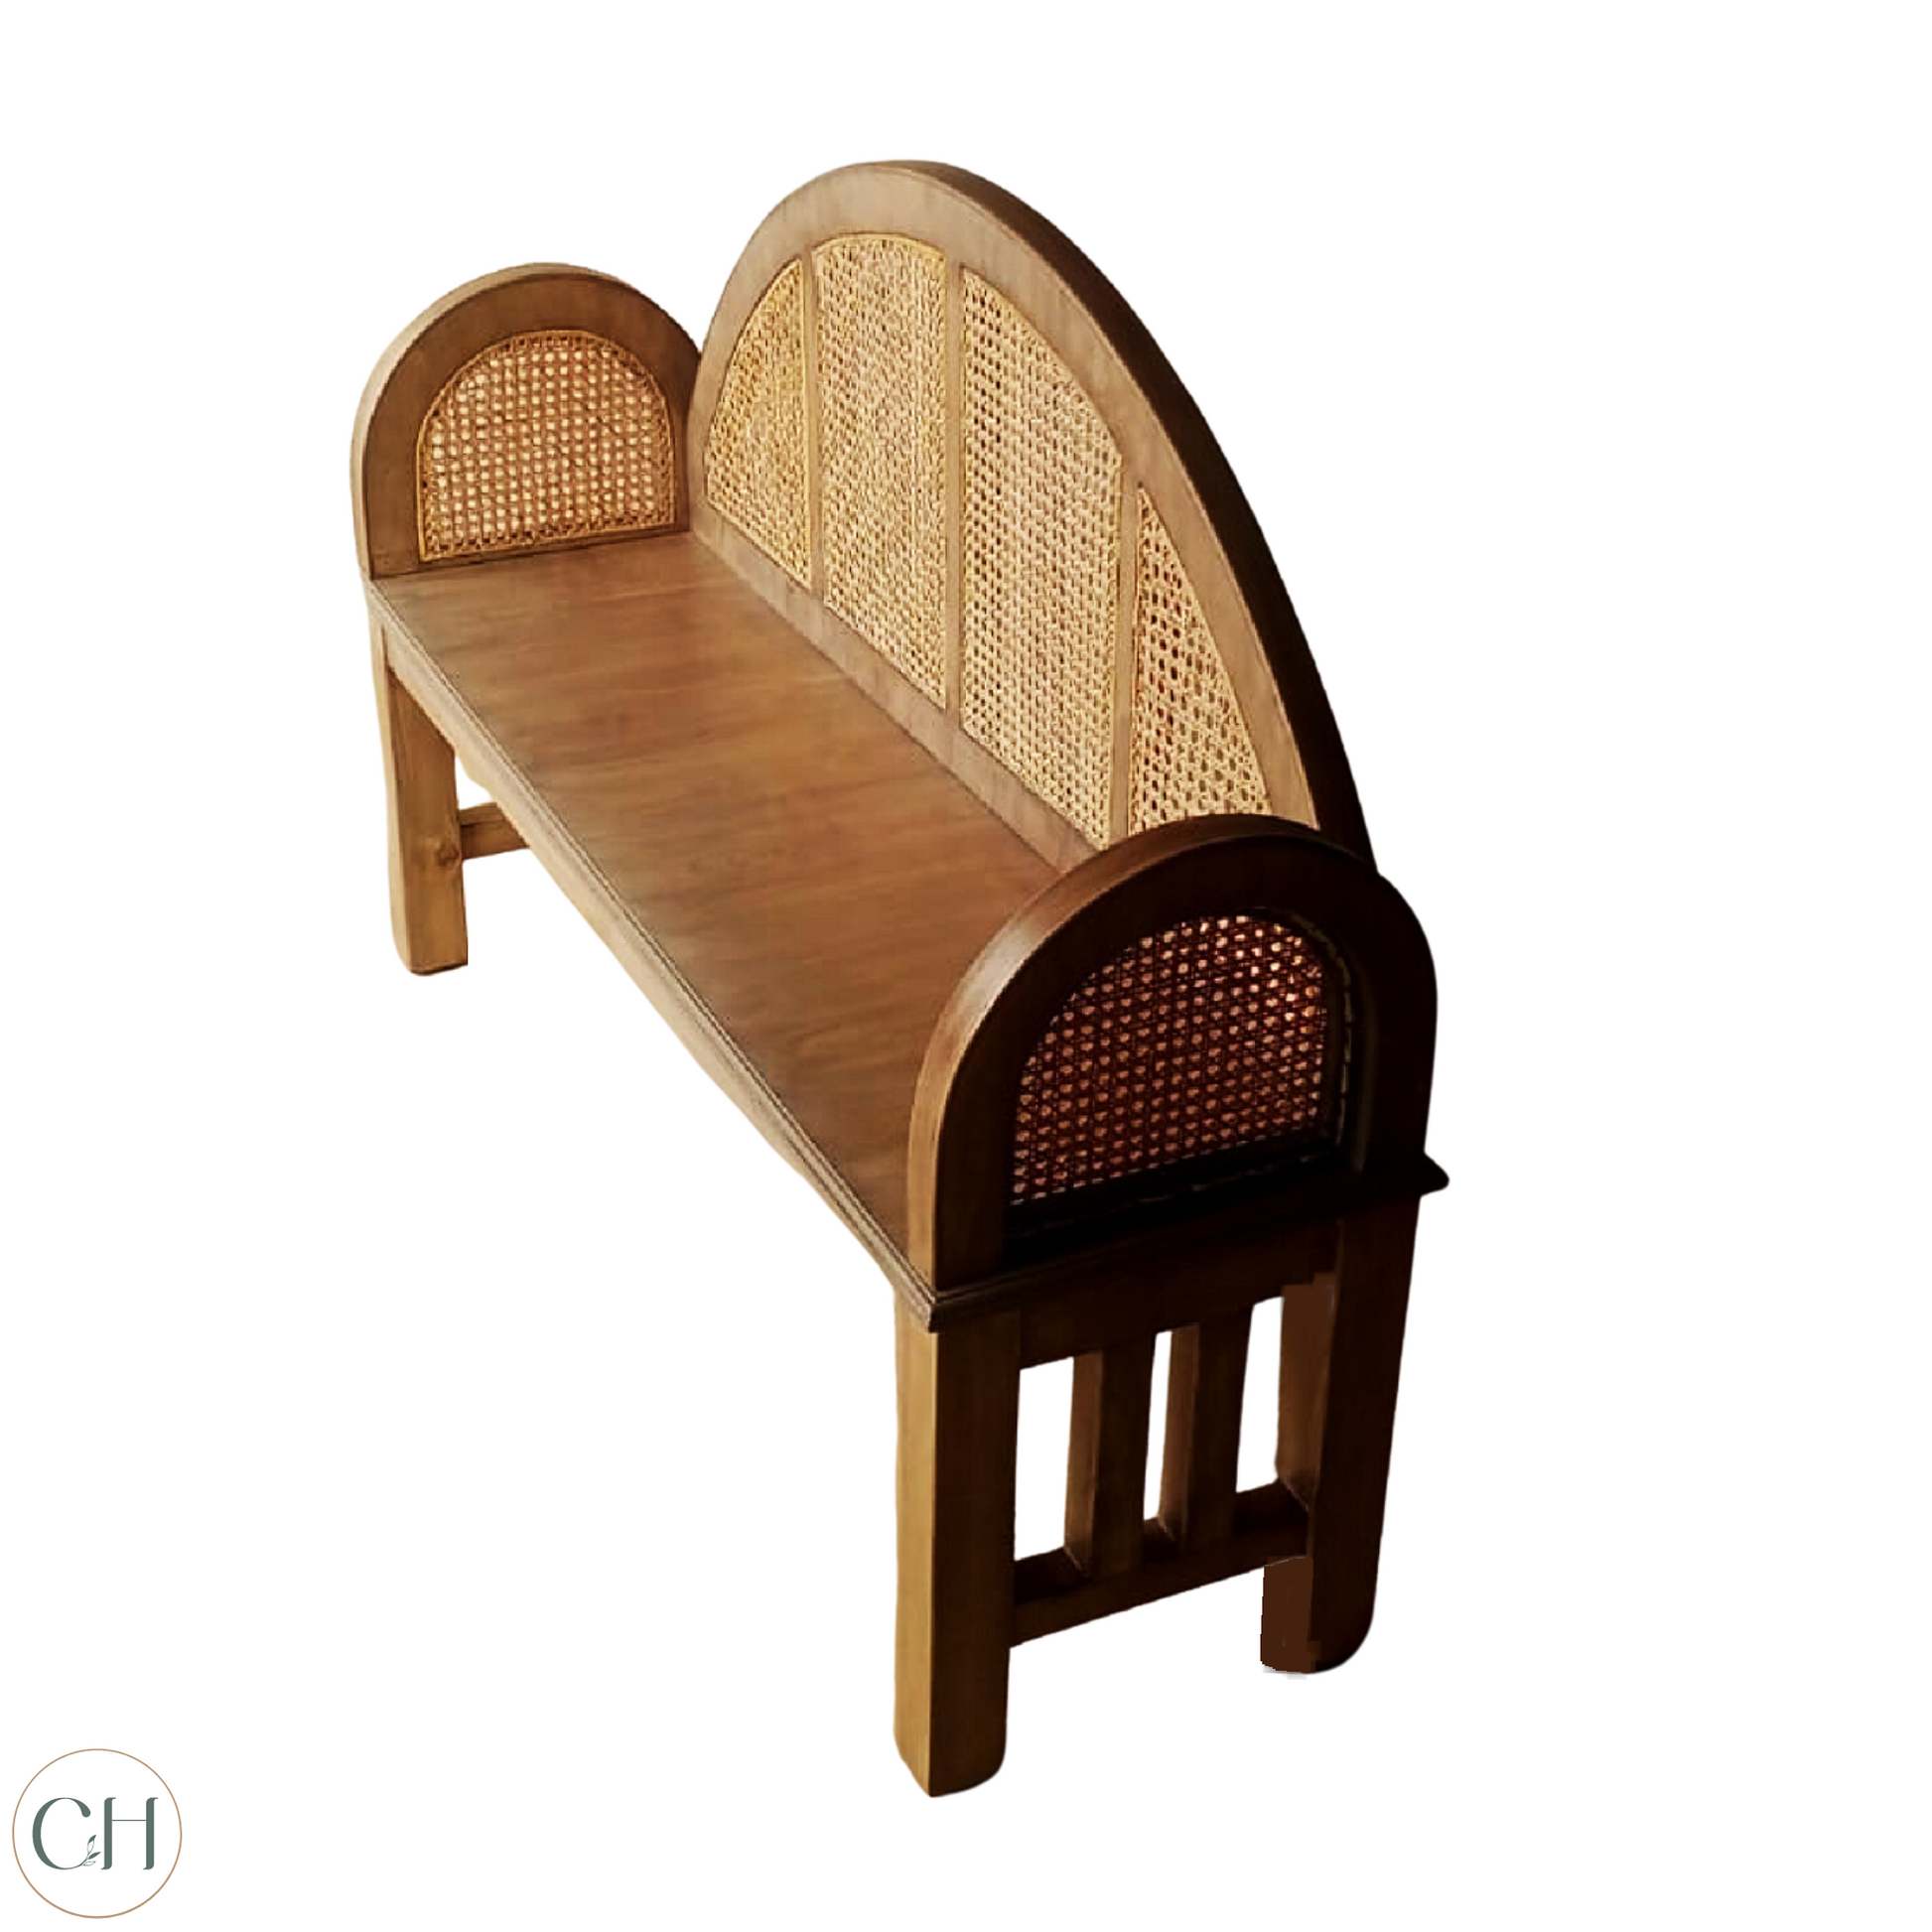 CustHum Elenore - solid wood entryway bench with woven rattan on back and arms (top view against white background)